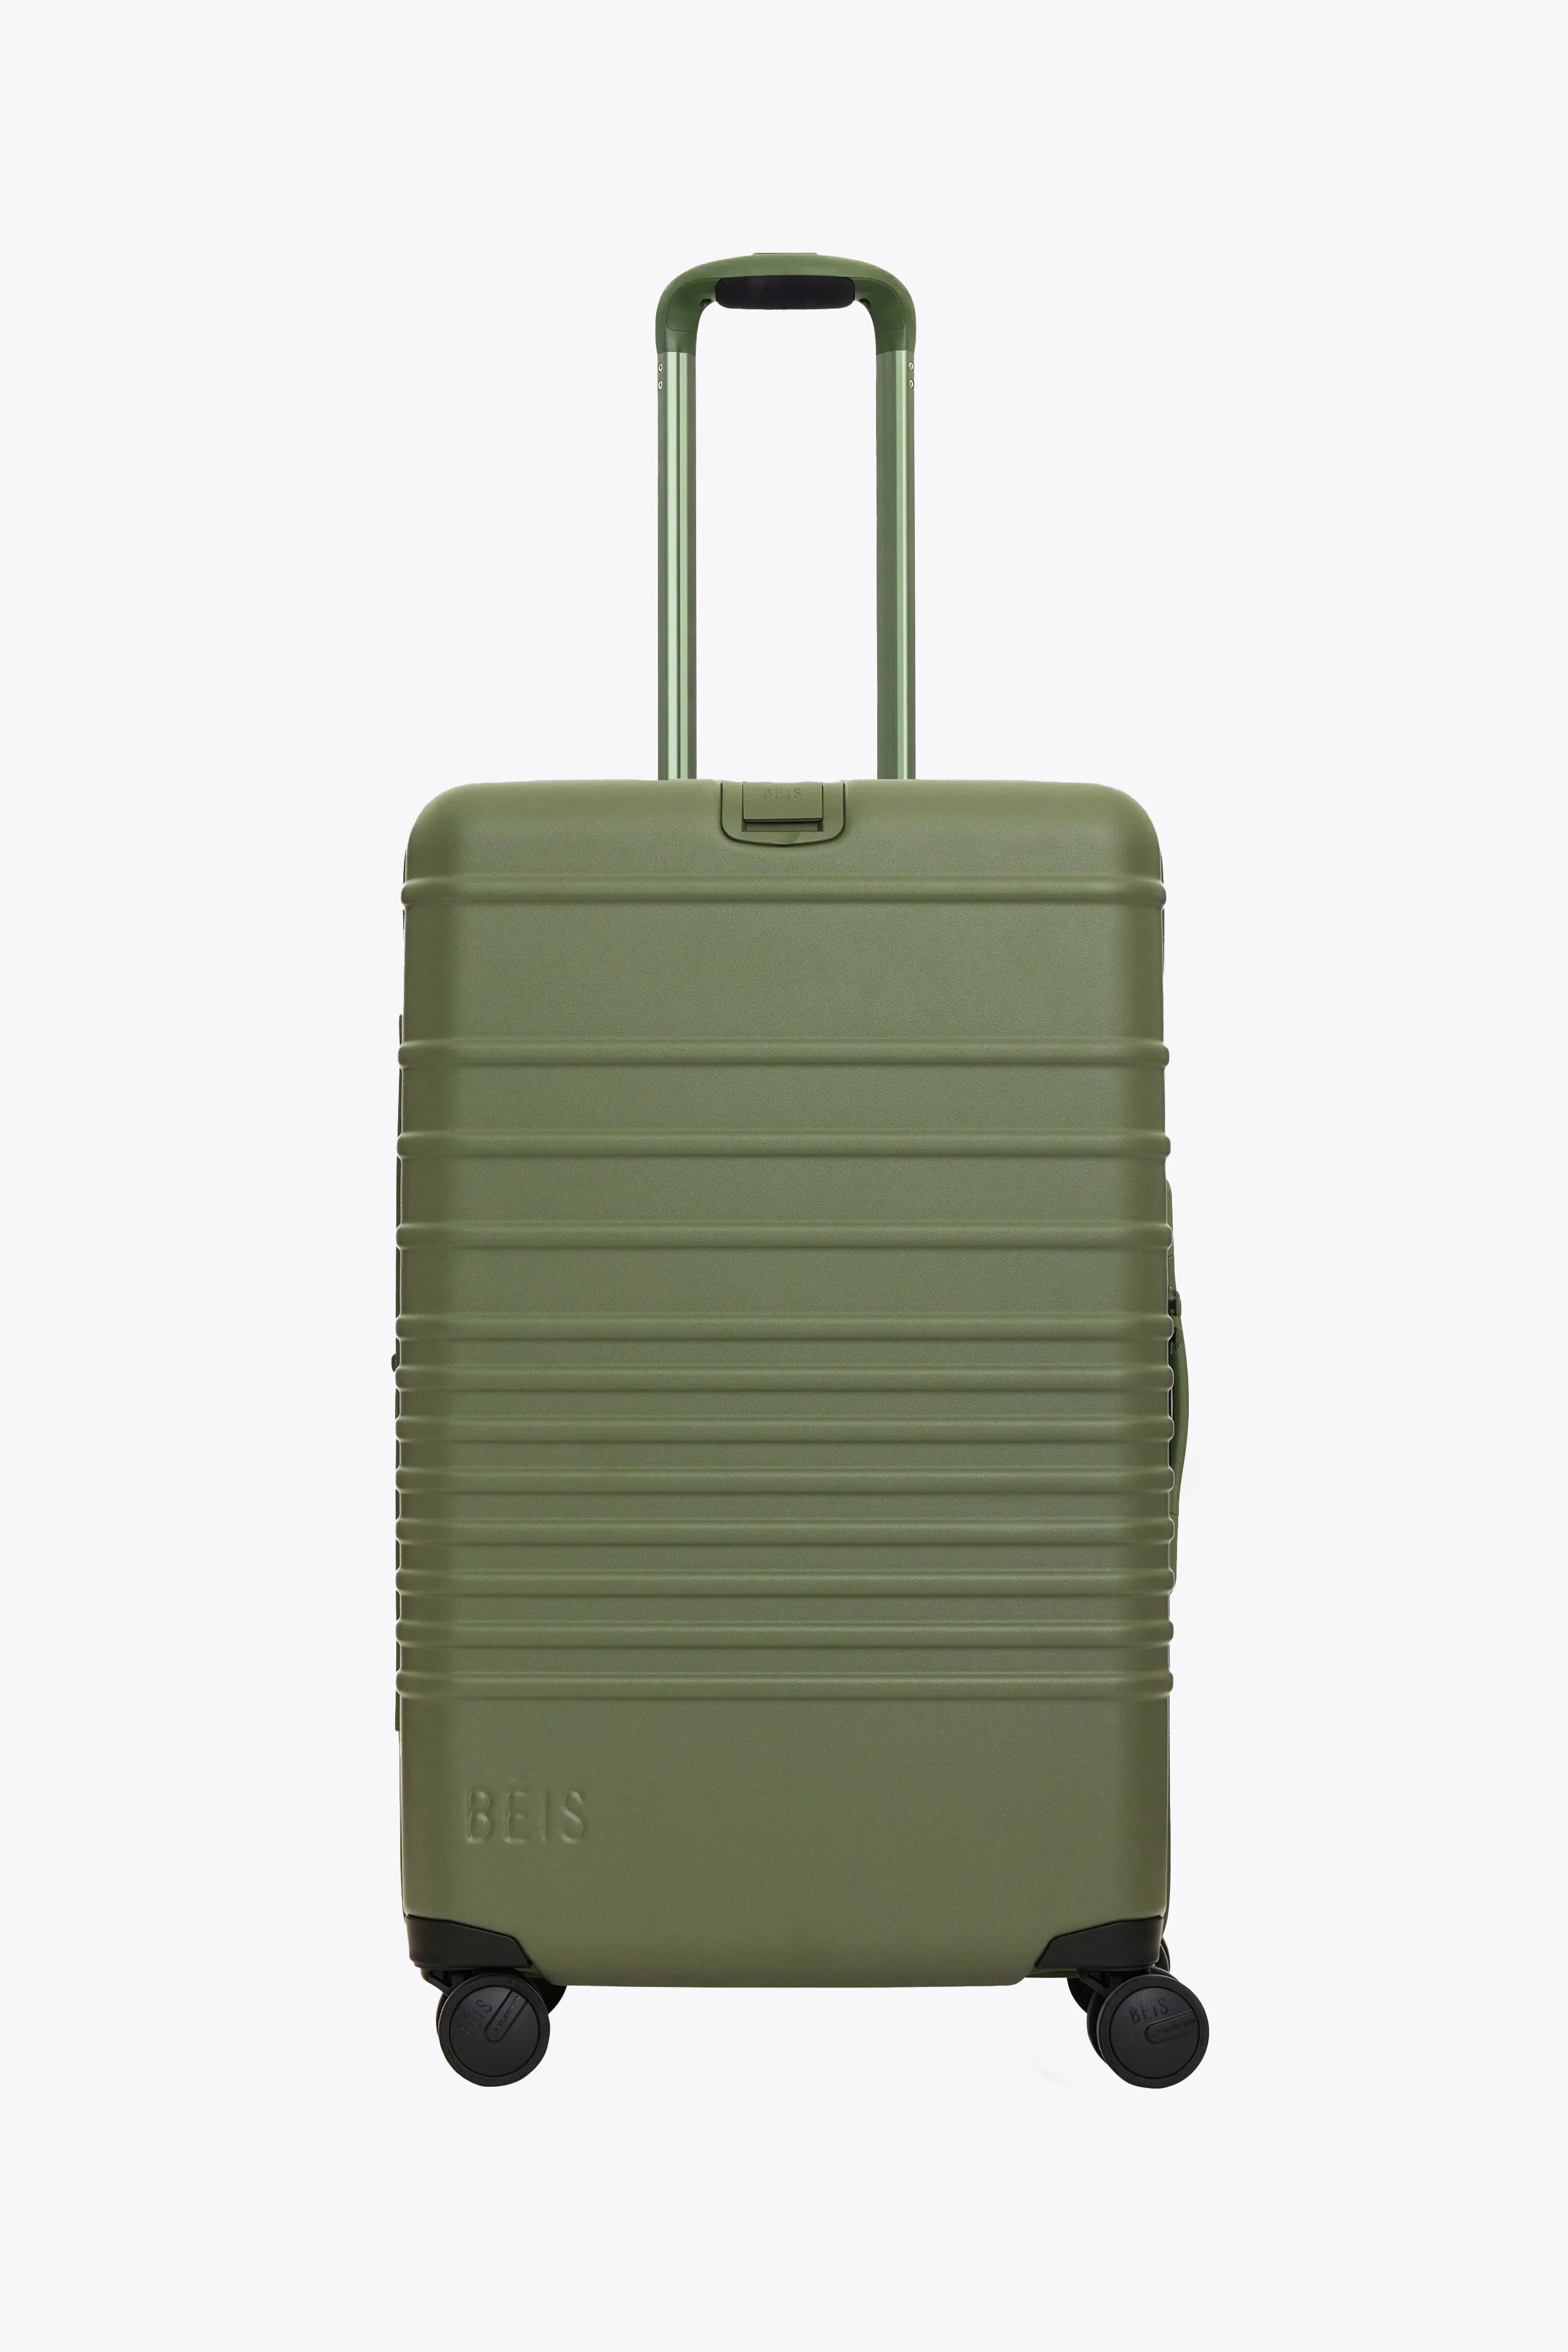 The Medium Check-In Roller in Olive | BÉIS Travel